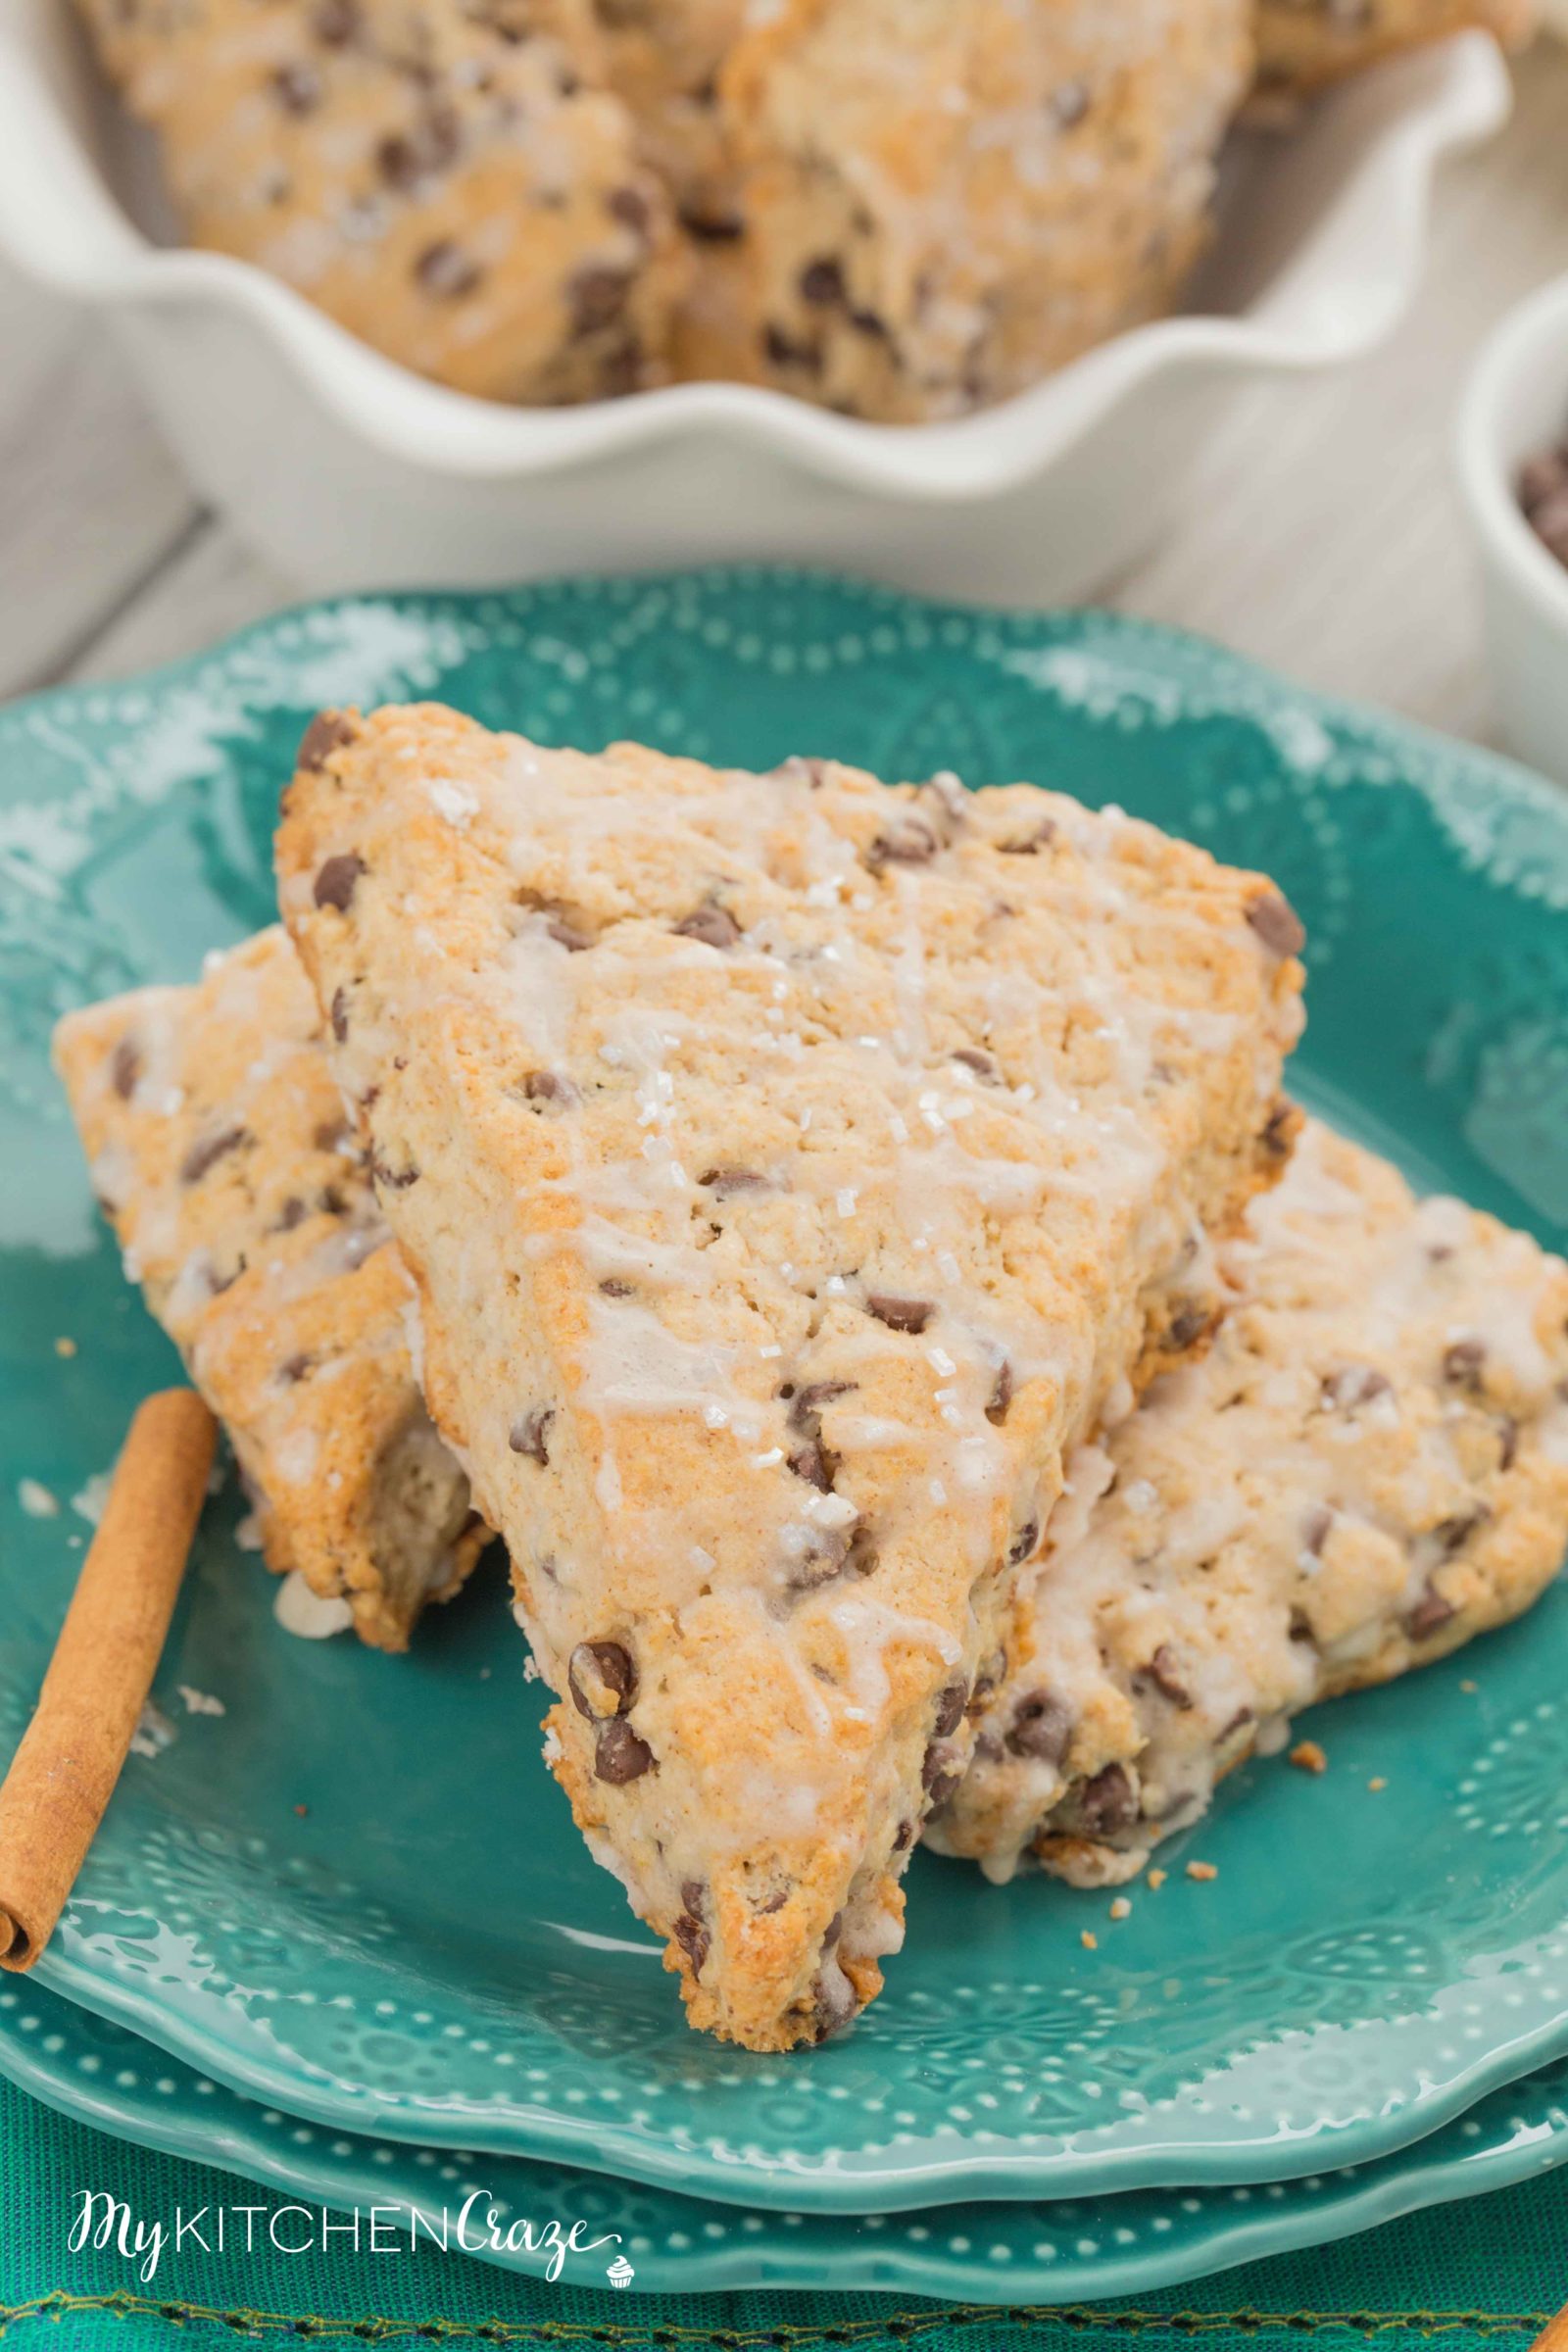 Cinnamon Chocolate Chip Scones ~ mykitchencraze.com ~ These scones are packed with chocolate chips and topped with a cinnamon glaze. These are the most delicious scones e-v-e-r! Moist, crumbly and irresistible. Give them a try.